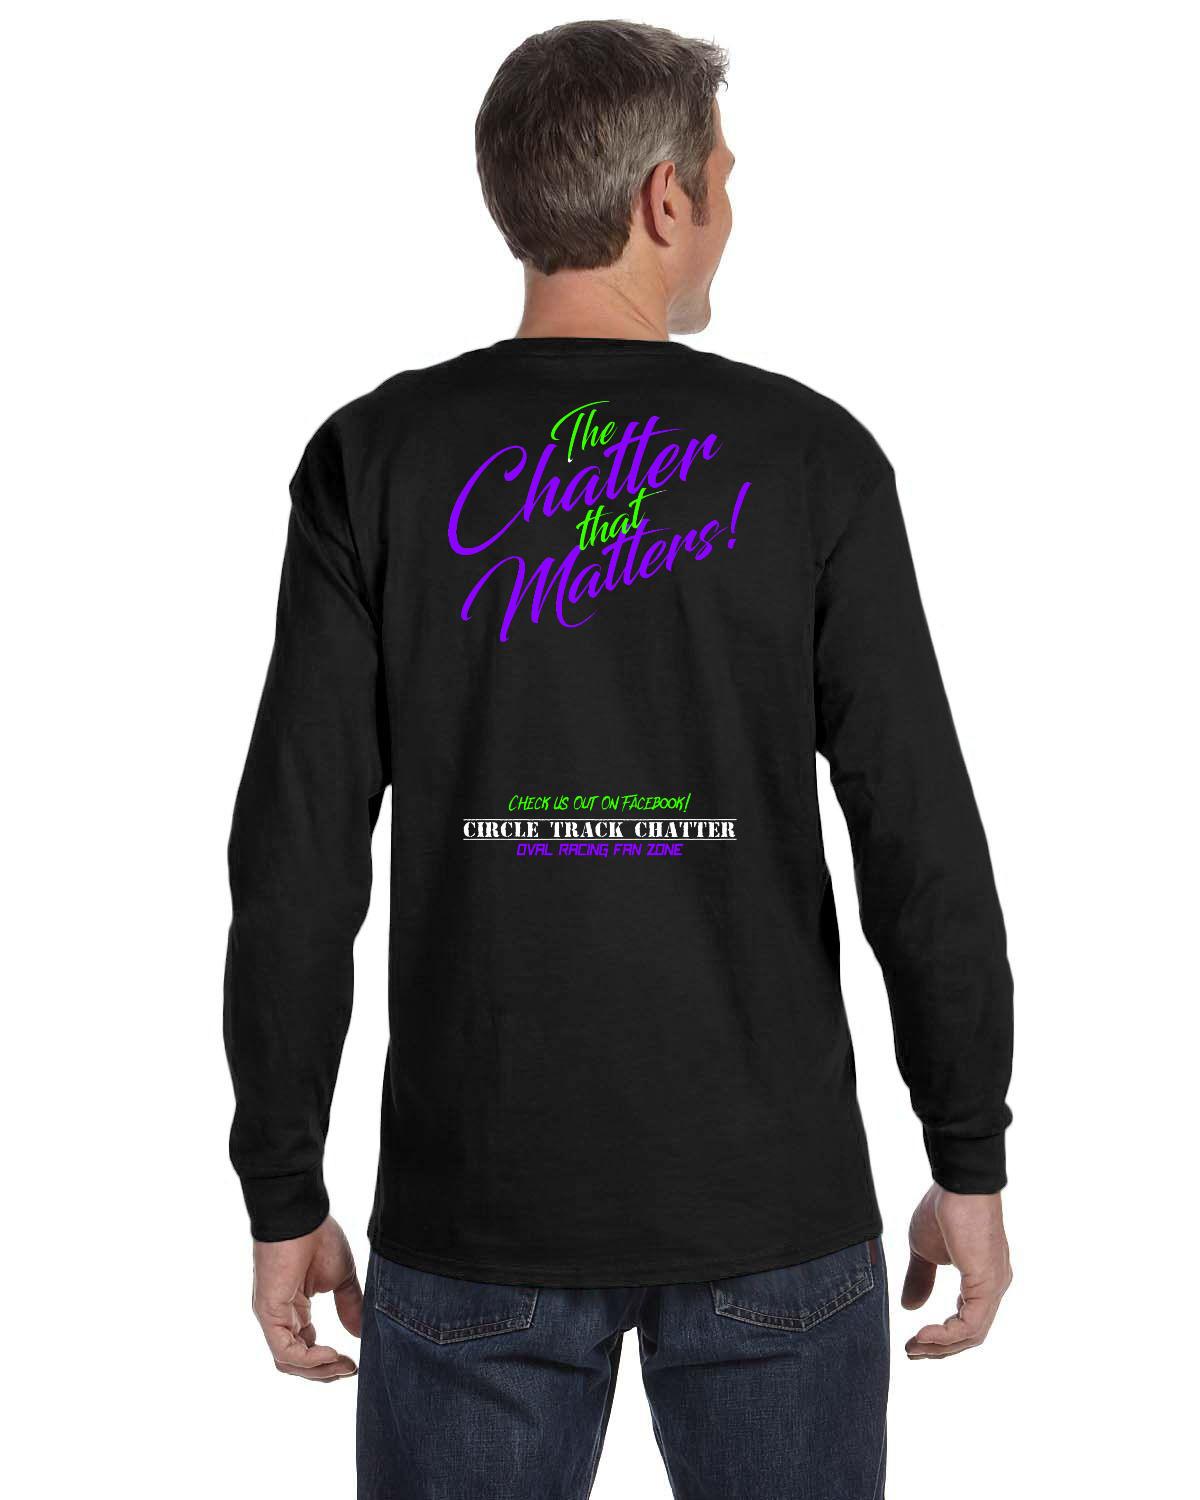 Circle Track Chatter Adult Long-Sleeve T-Shirt